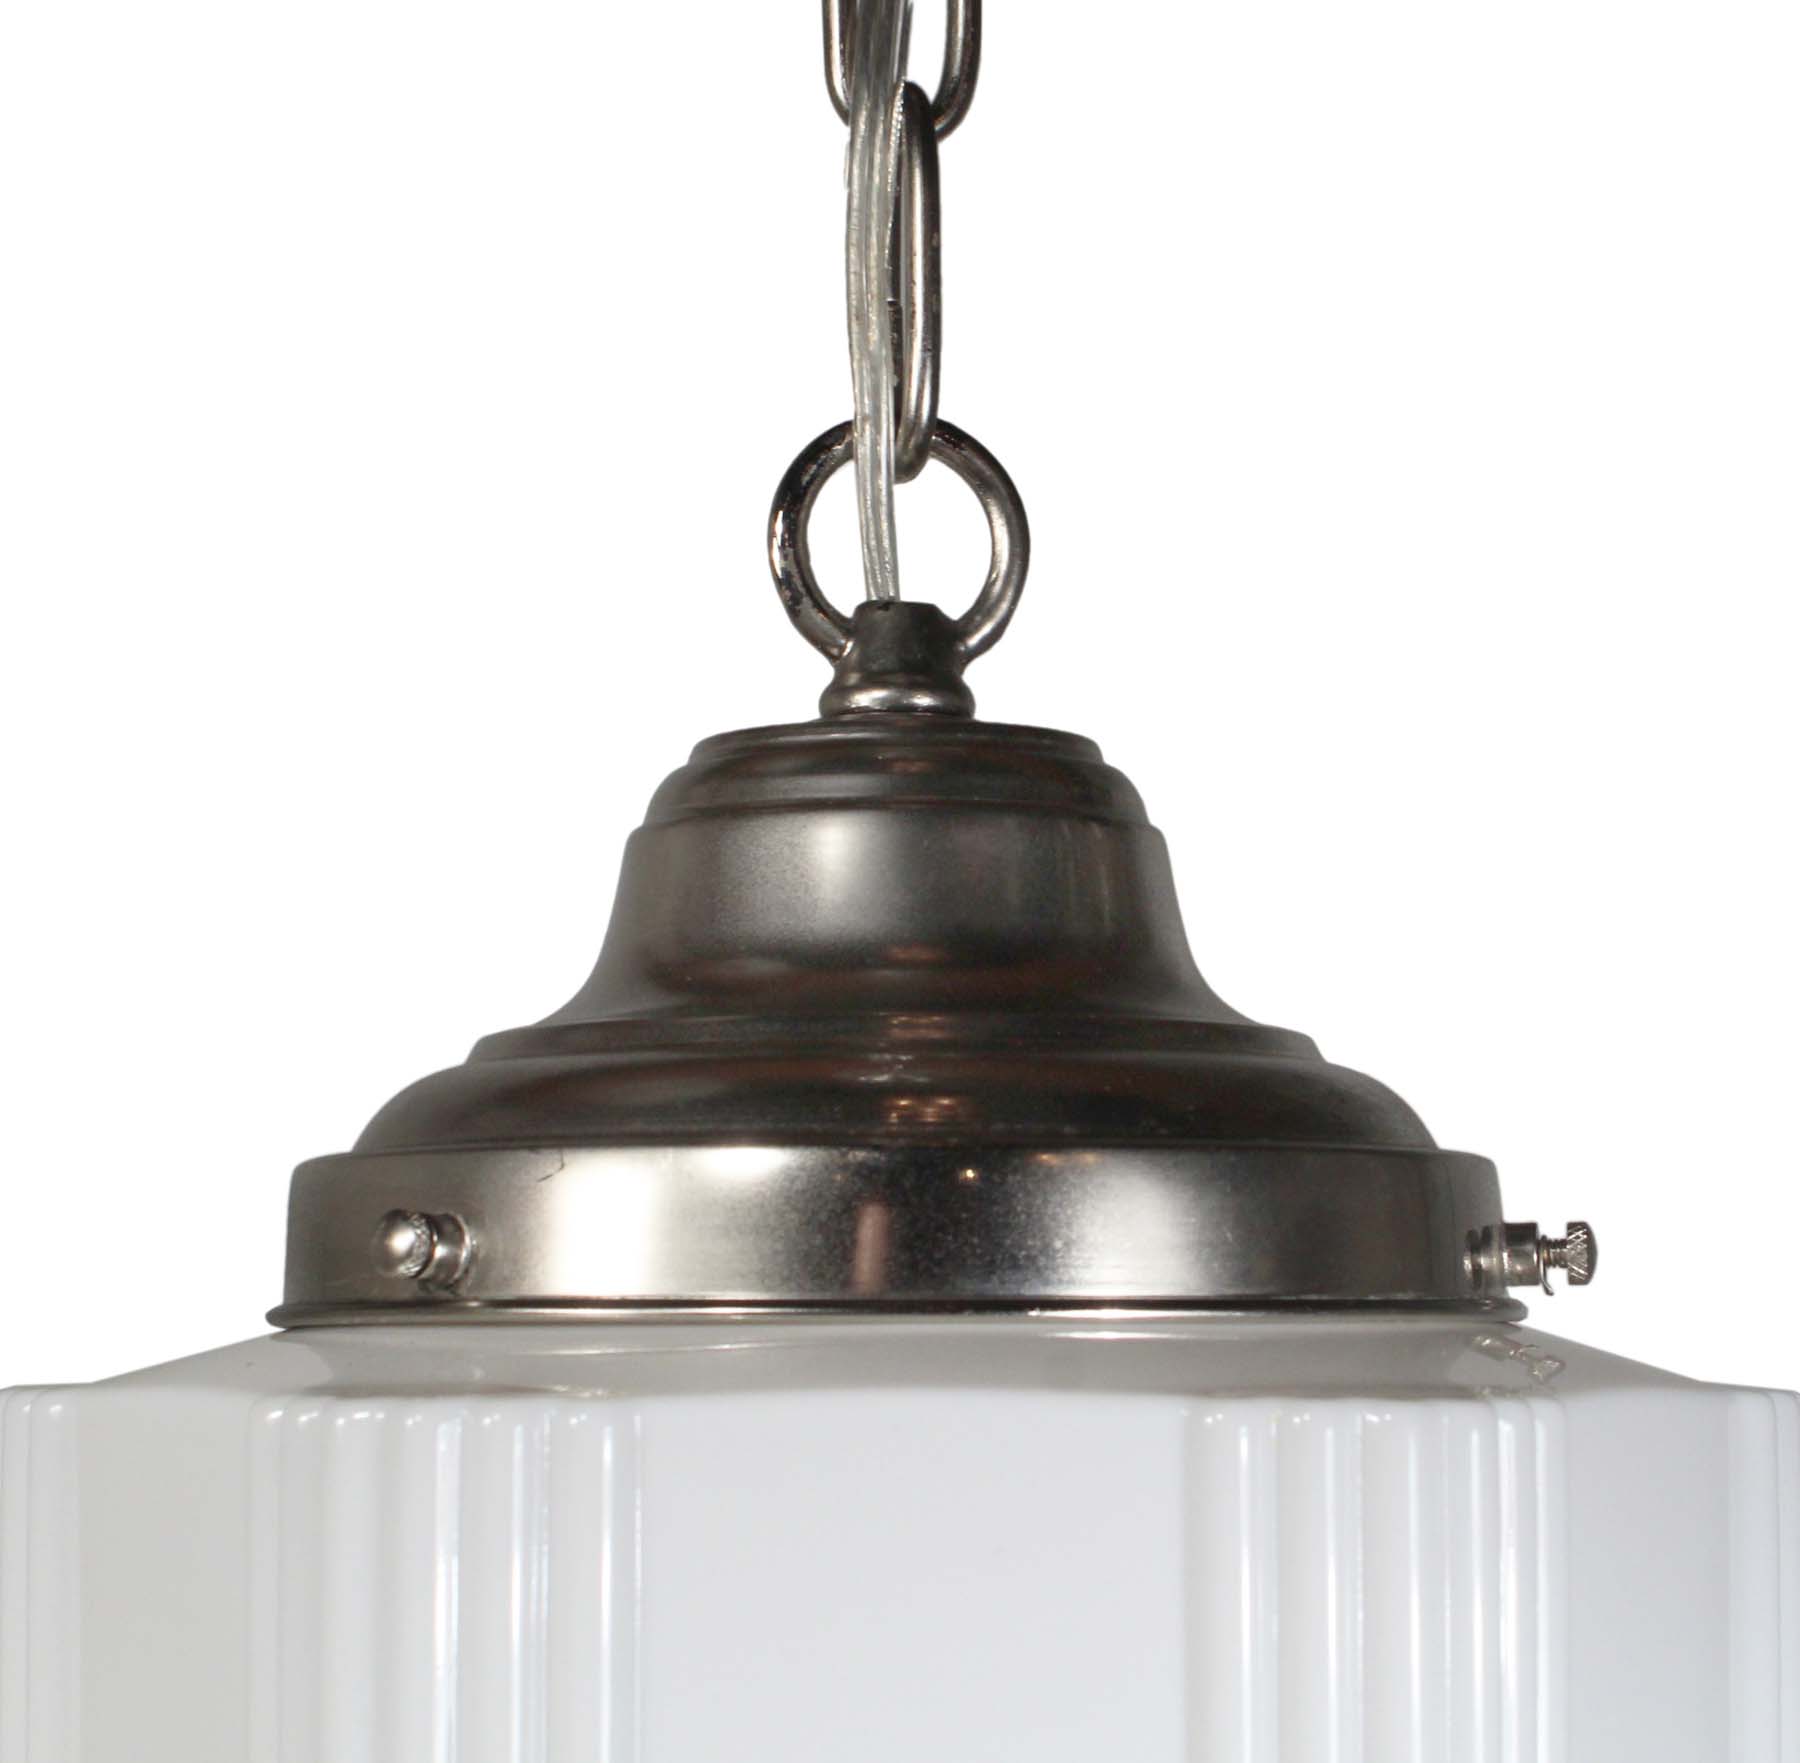 SOLD Matching Art Deco Skyscraper Pendant Lights with Two-Part Prismatic Shade-68875